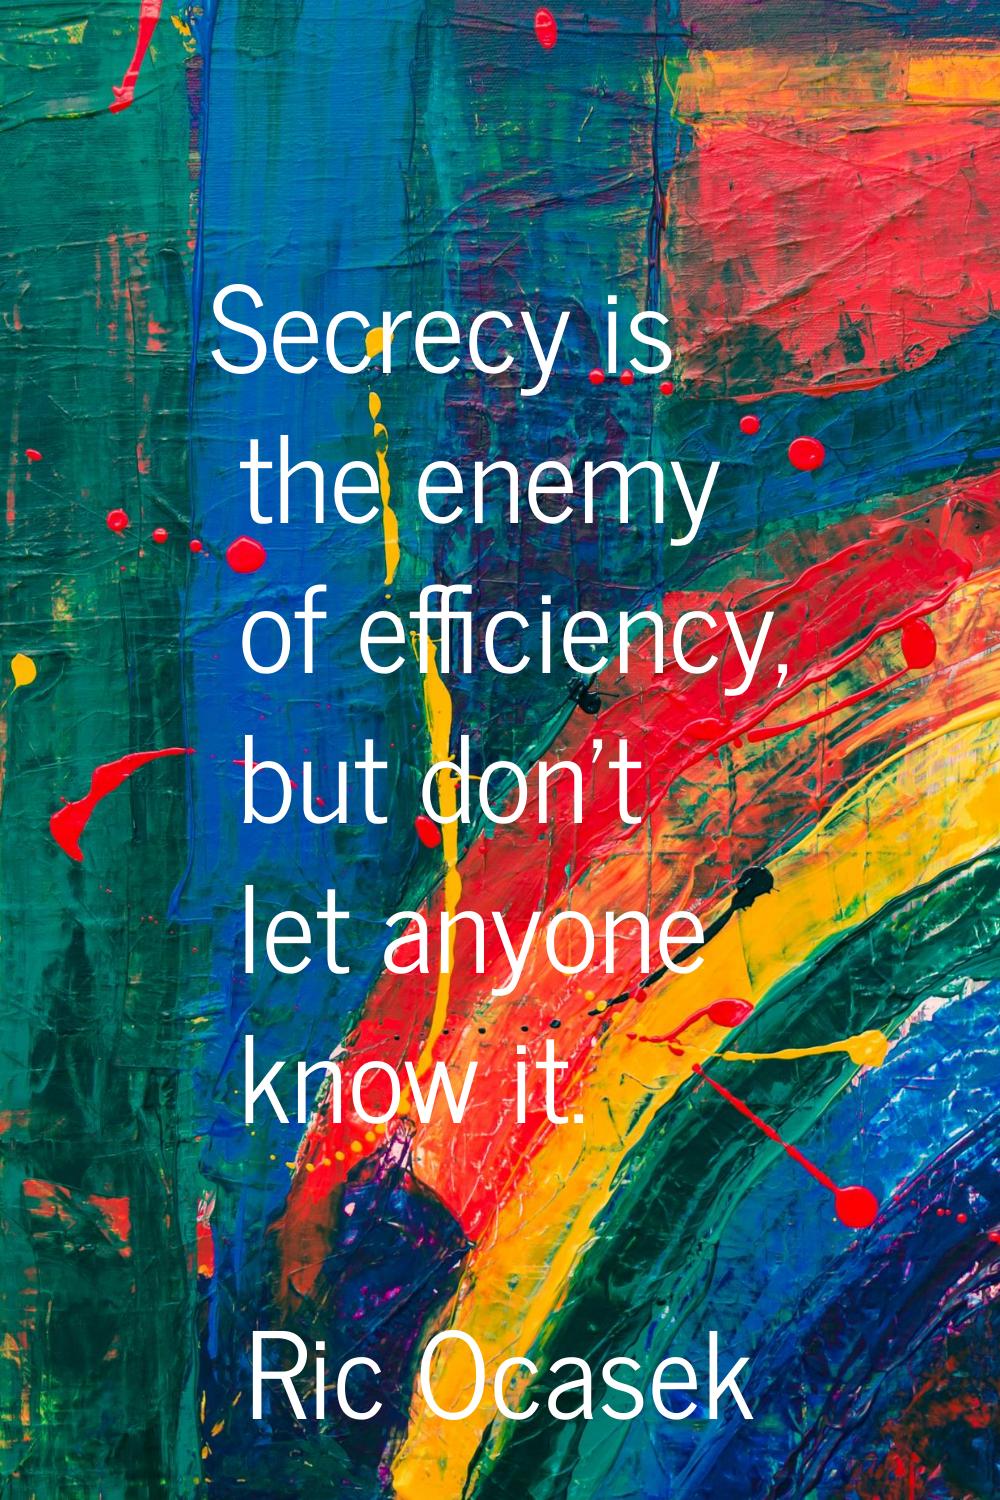 Secrecy is the enemy of efficiency, but don't let anyone know it.